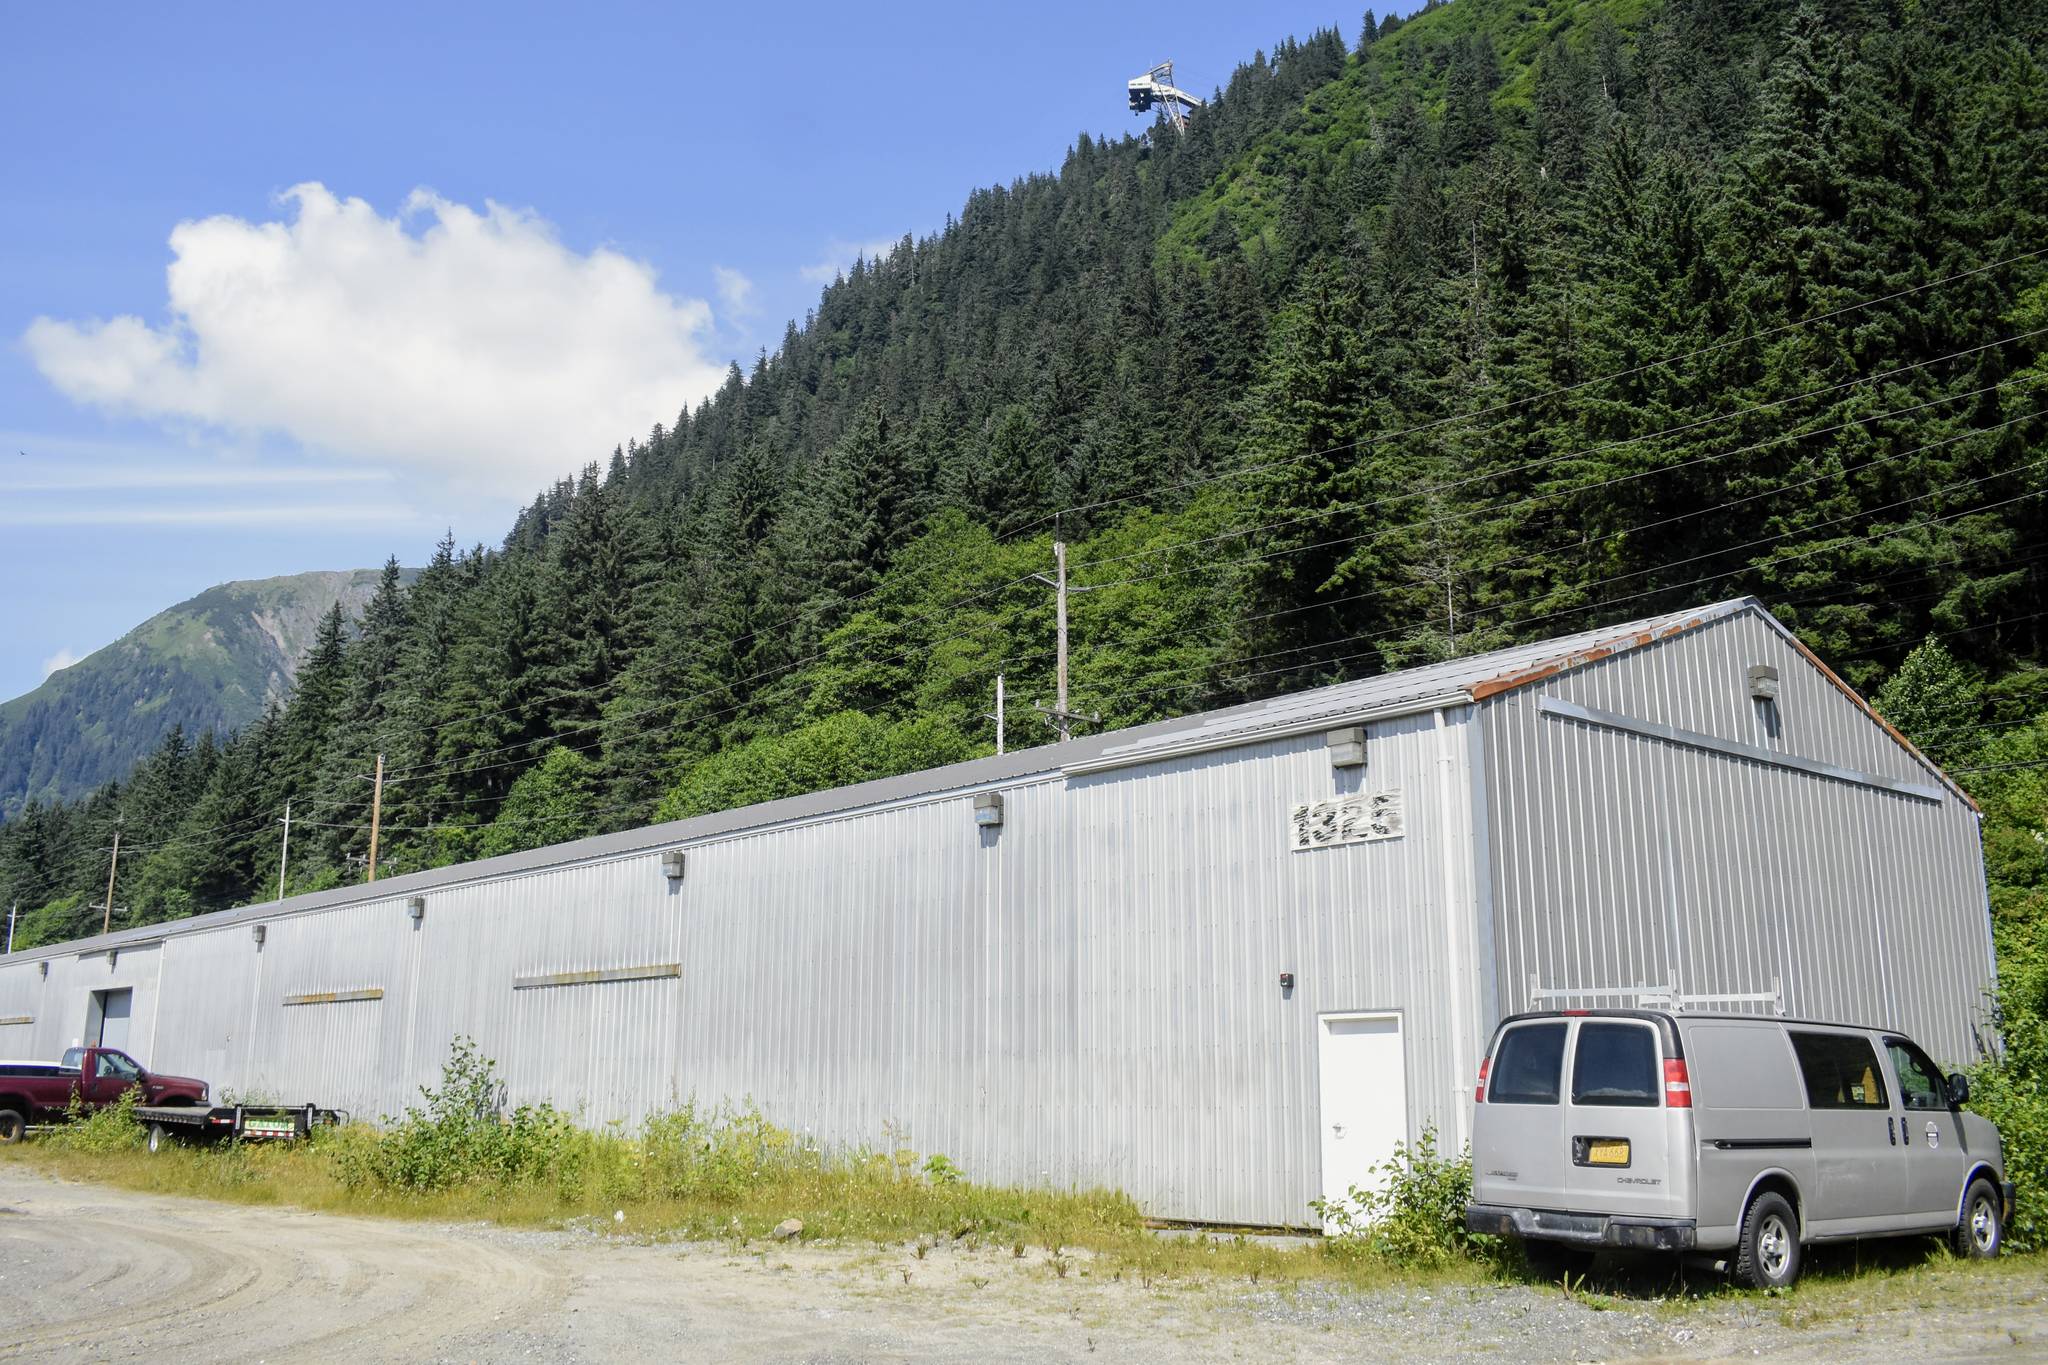 A surplus warehouse at 1325 Eastaugh Way, off Thane Road, seen here on Monday, July 19, 2021, is being considered by the City and Borough of Juneau as a possible location for a ballot-counting center should the city decide to increase its use of voting by mail in future municipal elections. (Peter Segall / Juneau Empire)